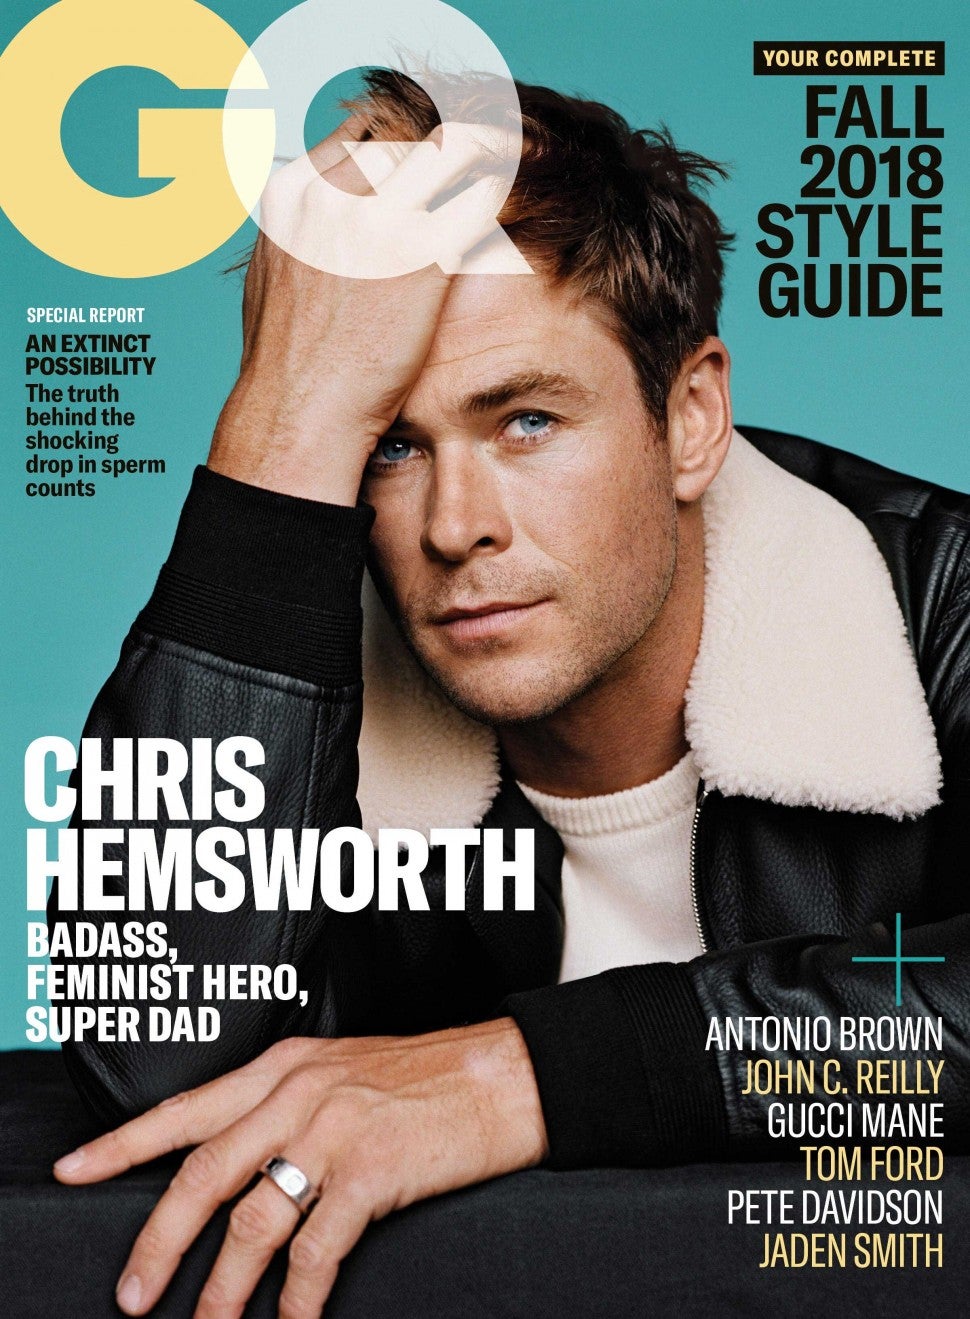 Chris Hemsworth on the cover of 'GQ'